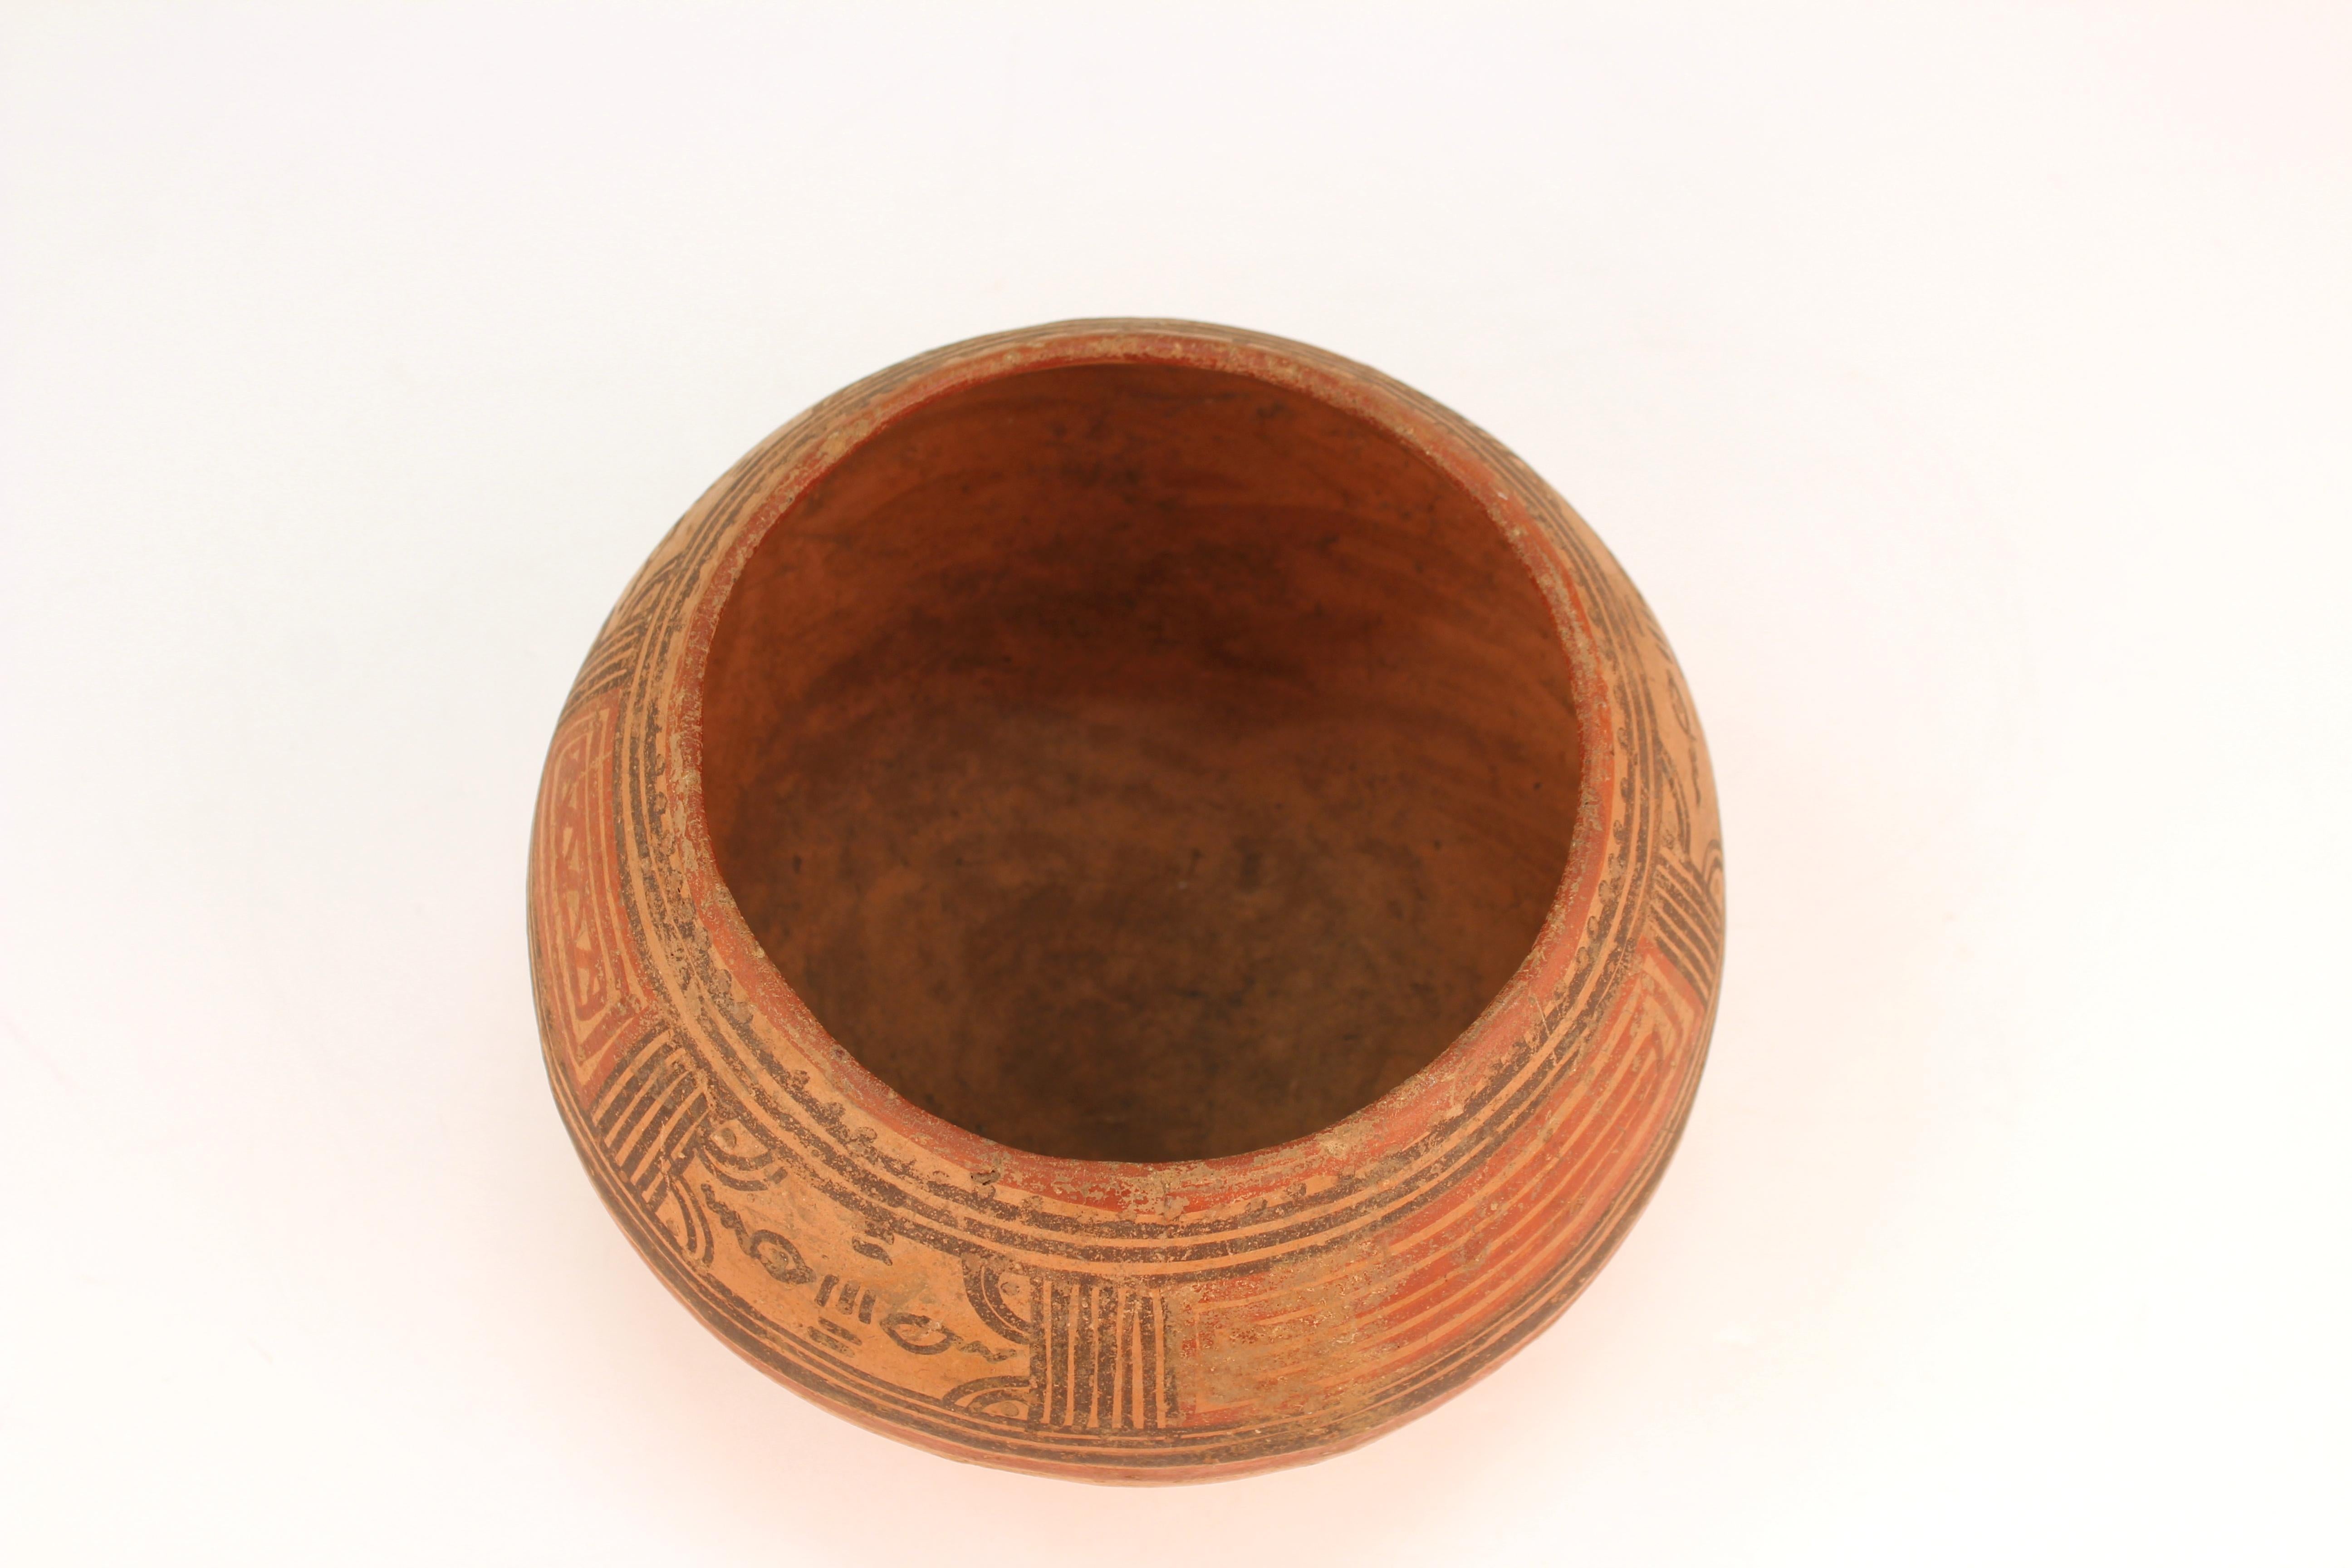 18th Century and Earlier Pre-Columbian Nicoya Pottery Bowl from Costa Rica